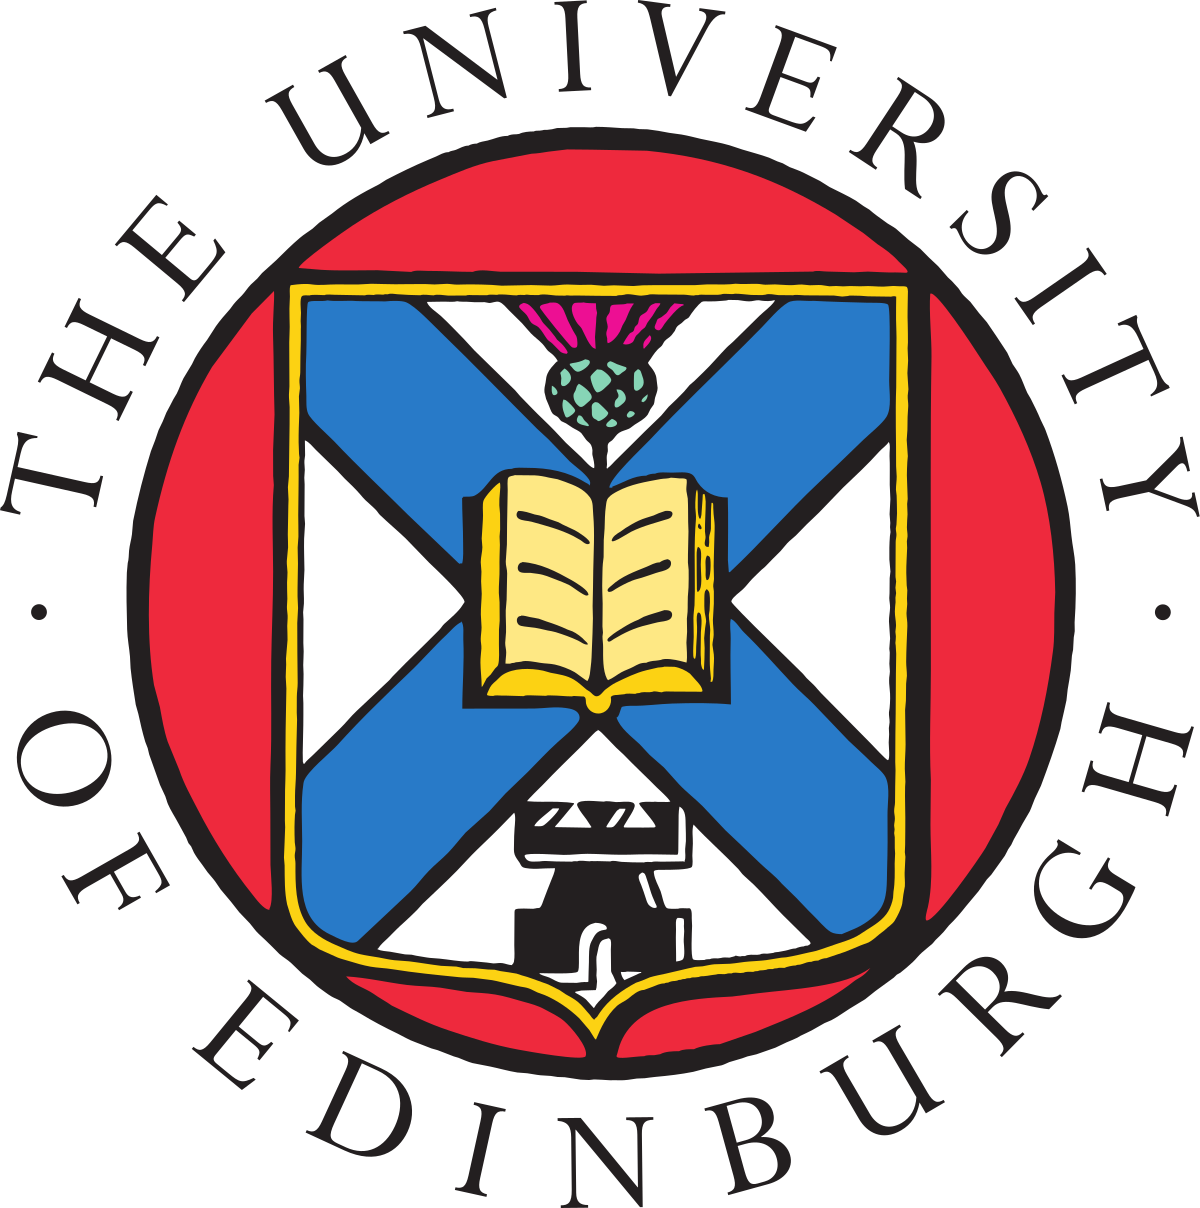 You are currently viewing University of Edinburgh: Epilepsy support needed to reduce preventable deaths